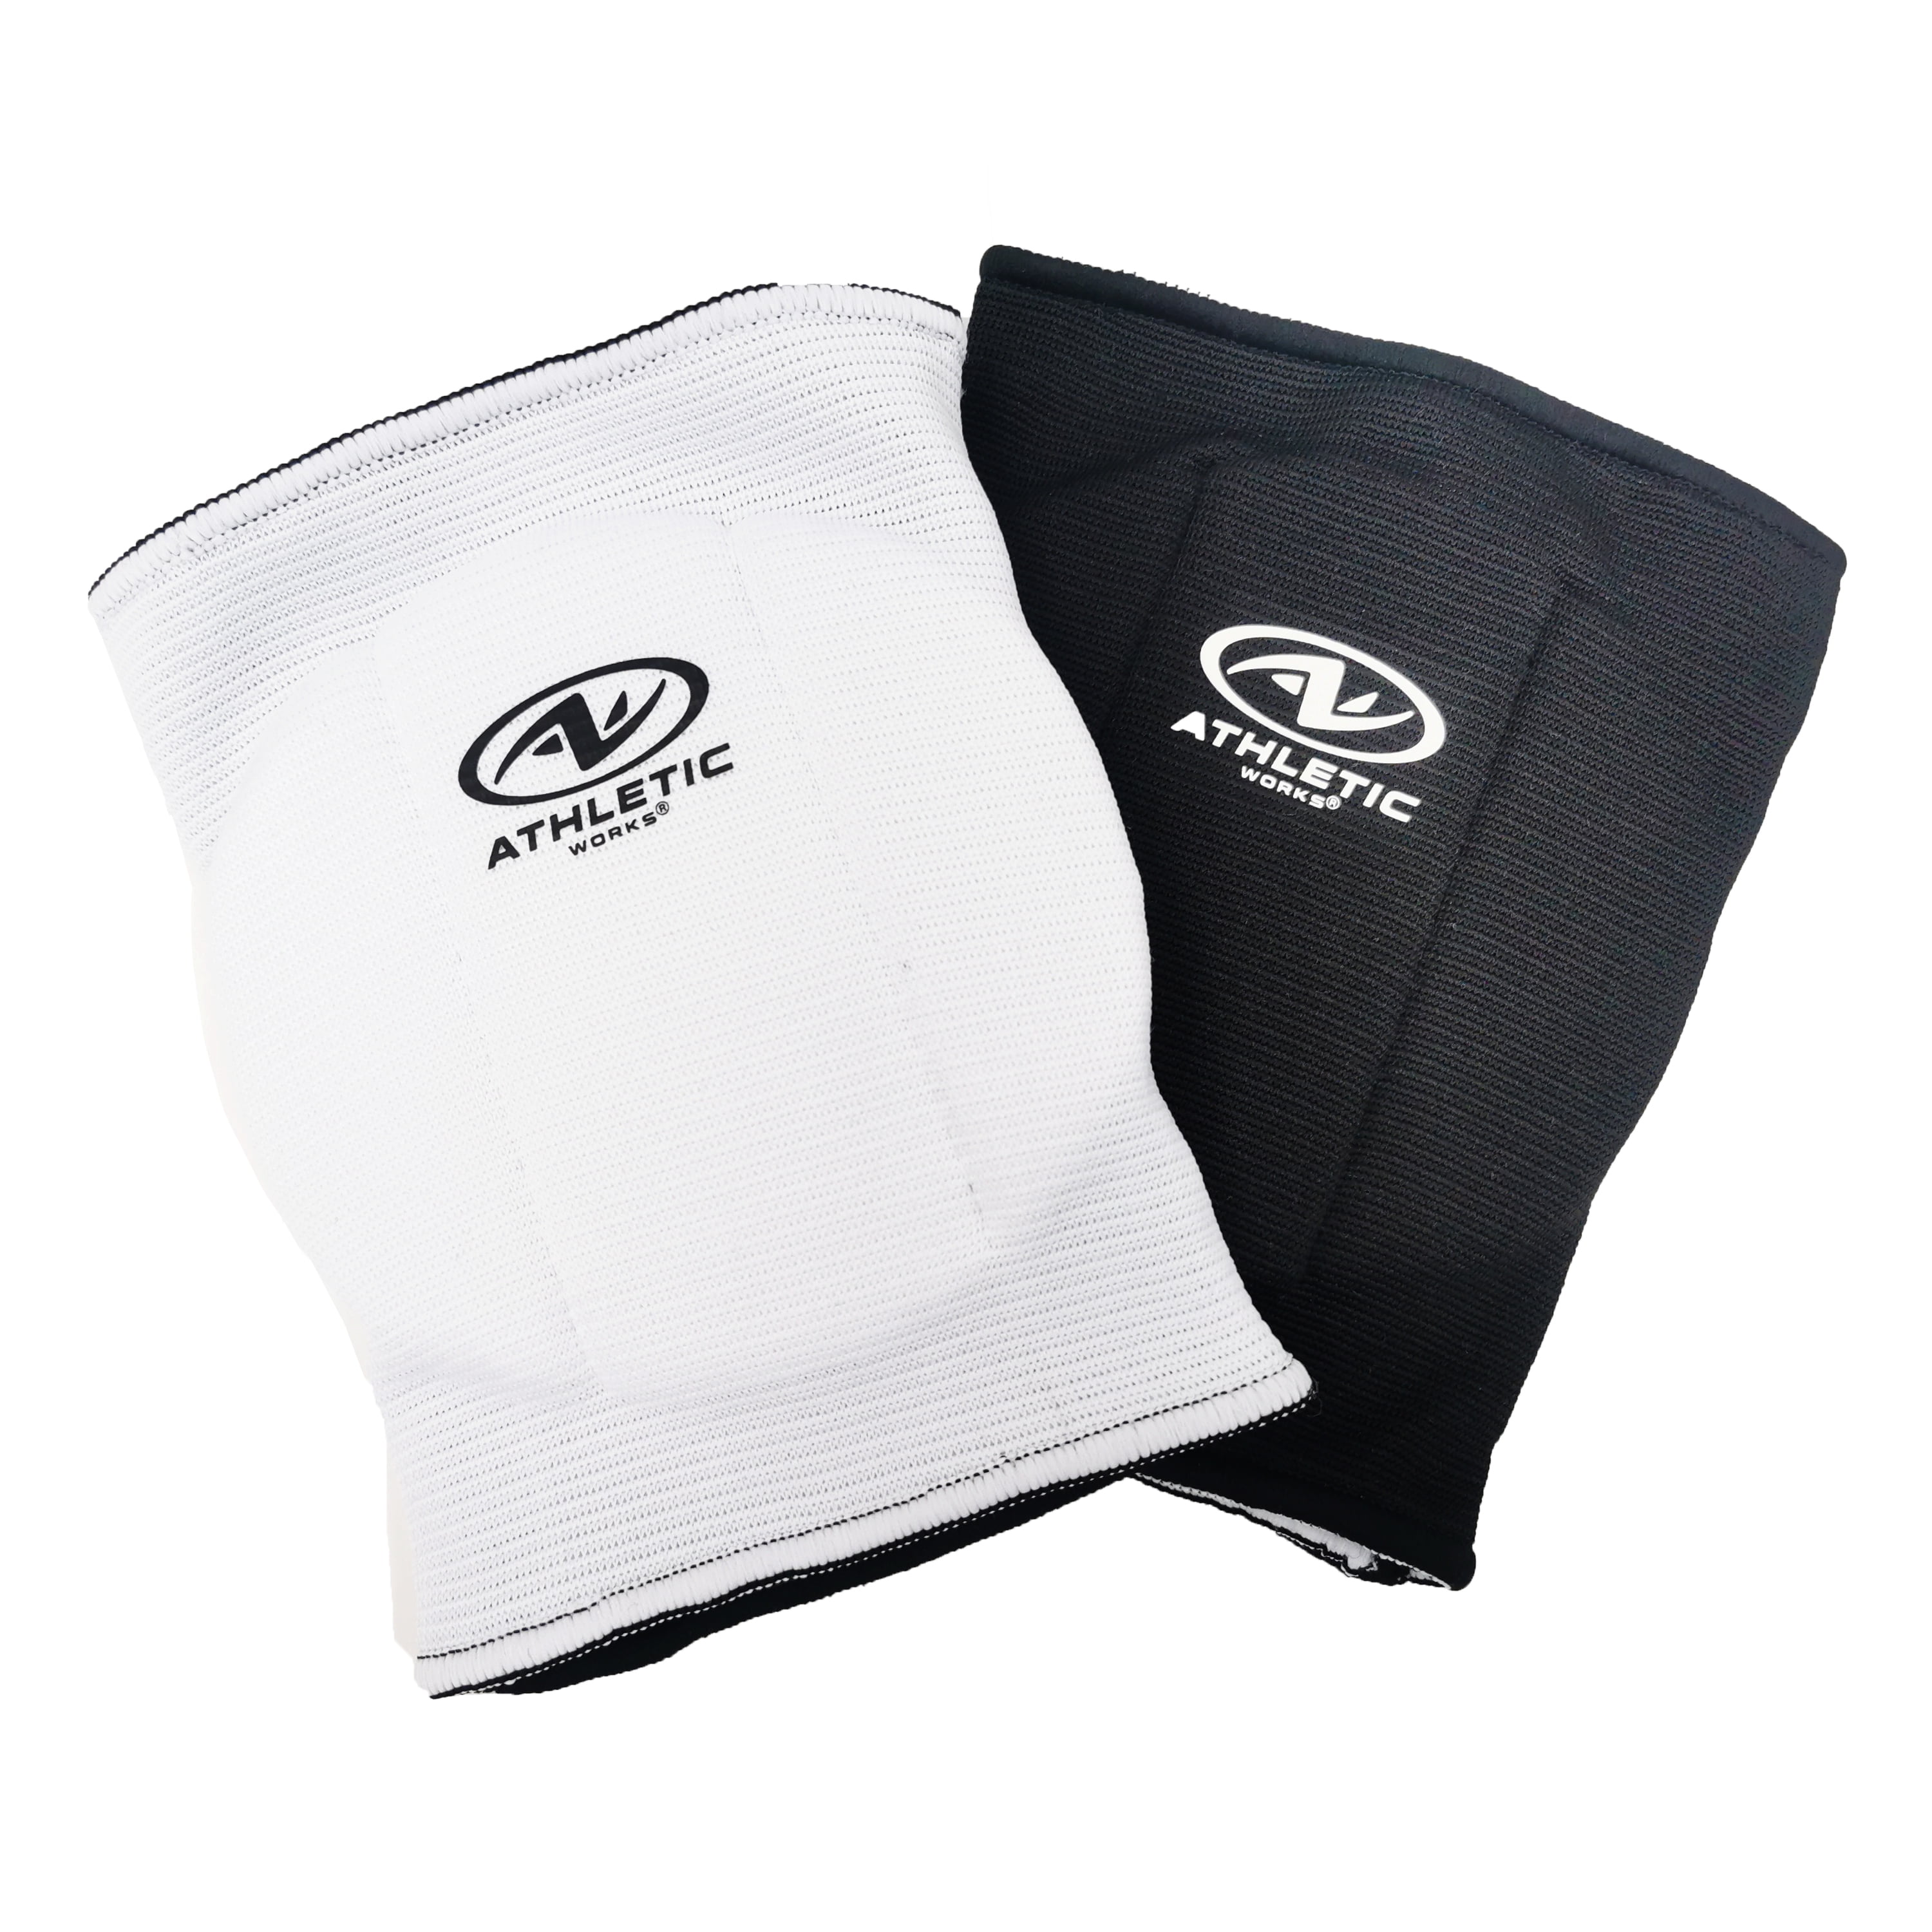 All Star Youth Knee Sports Knee Pads 